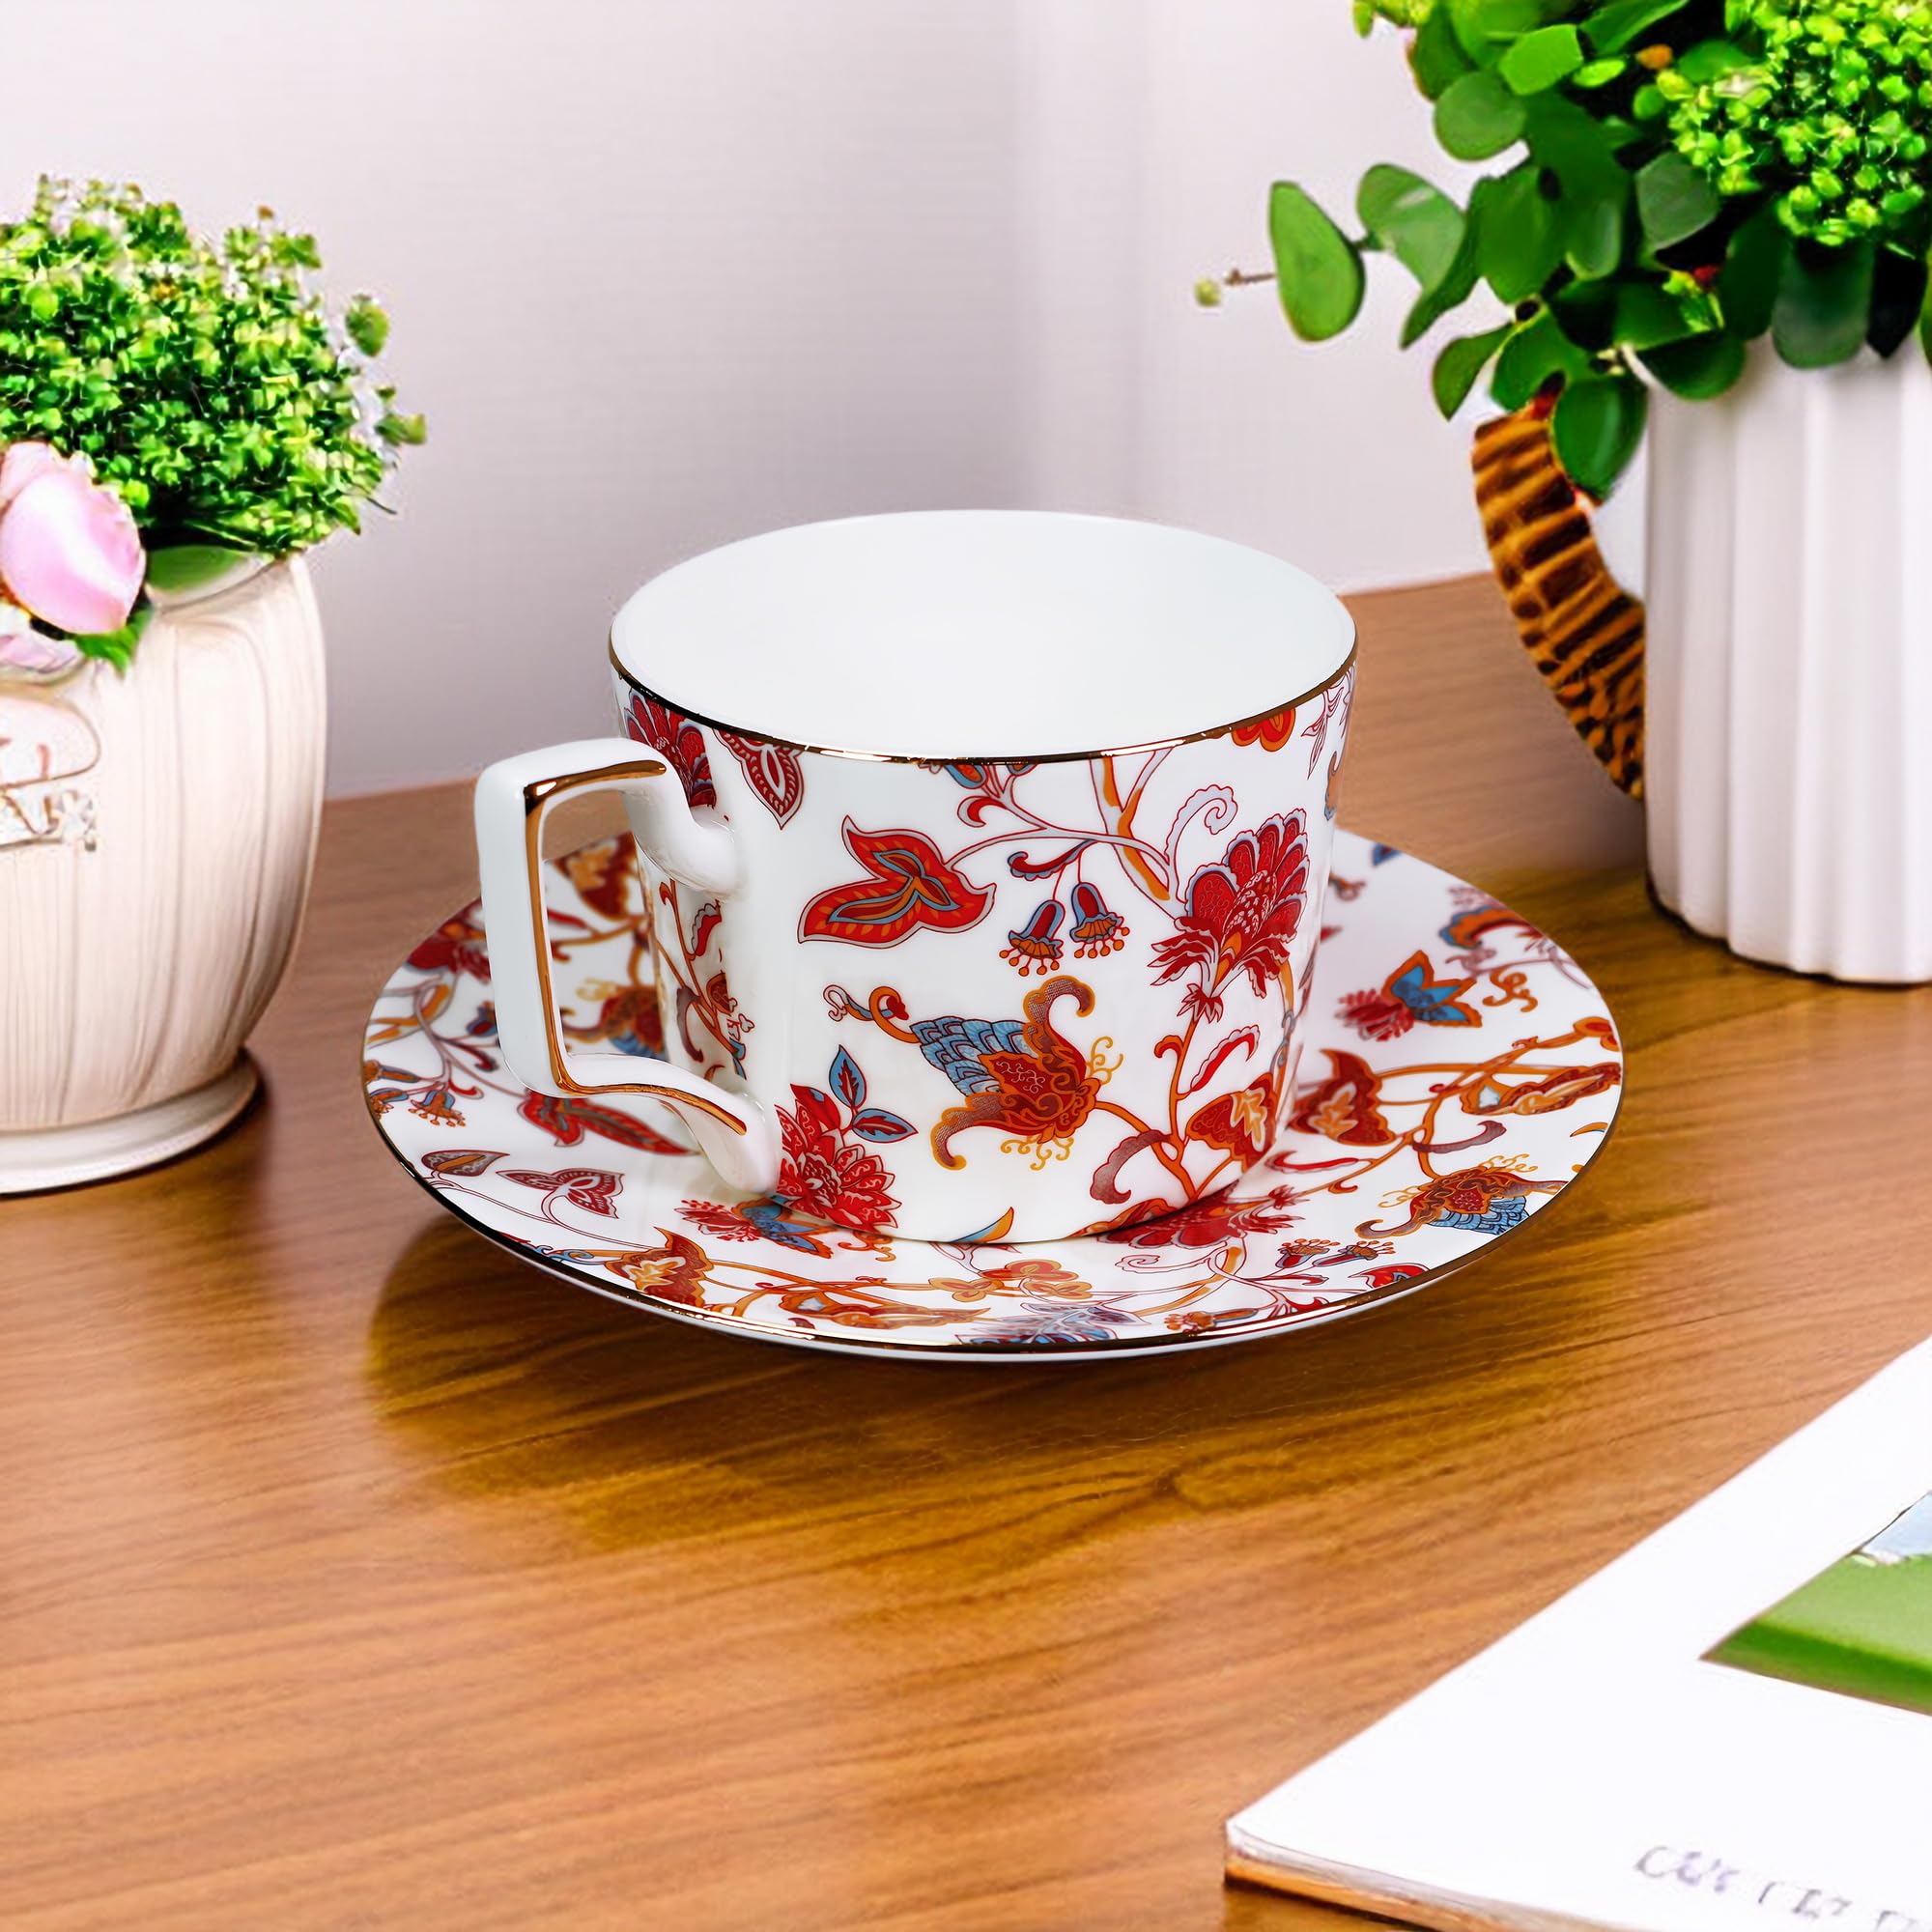 LanHong 8.5 Ounces Tea Cup and Saucer Set Floral Tea Coffee Cup with Saucer Bone China Teacup and Saucer Set Gift for Mom Friend Tea Party (Red)